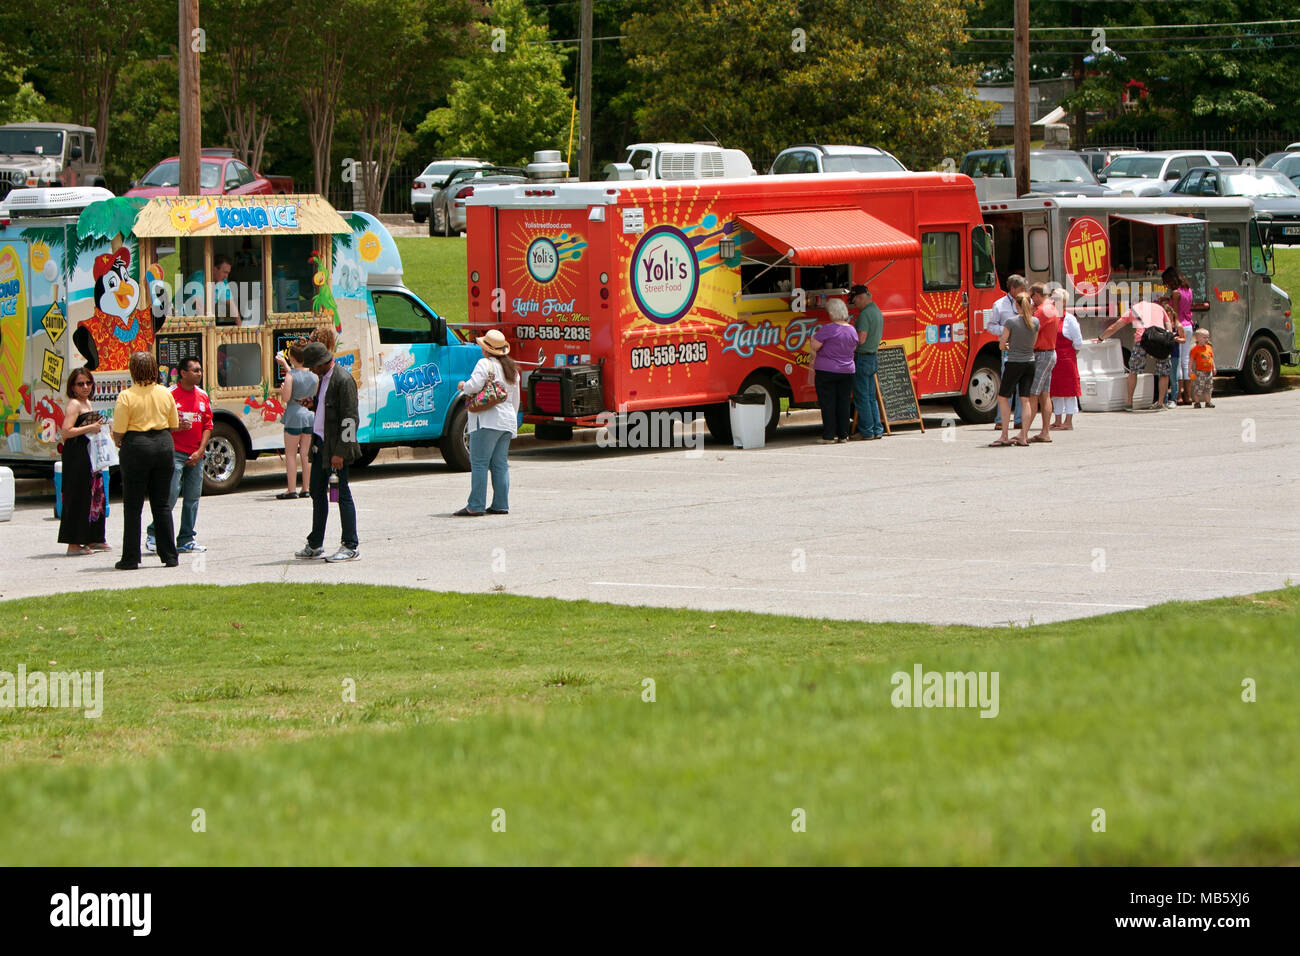 Atlanta, GA, USA - May 25, 2013:  Patrons buy food from food trucks at the GREAT festival, an event celebrating Great Britain and the United Kingdom. Stock Photo